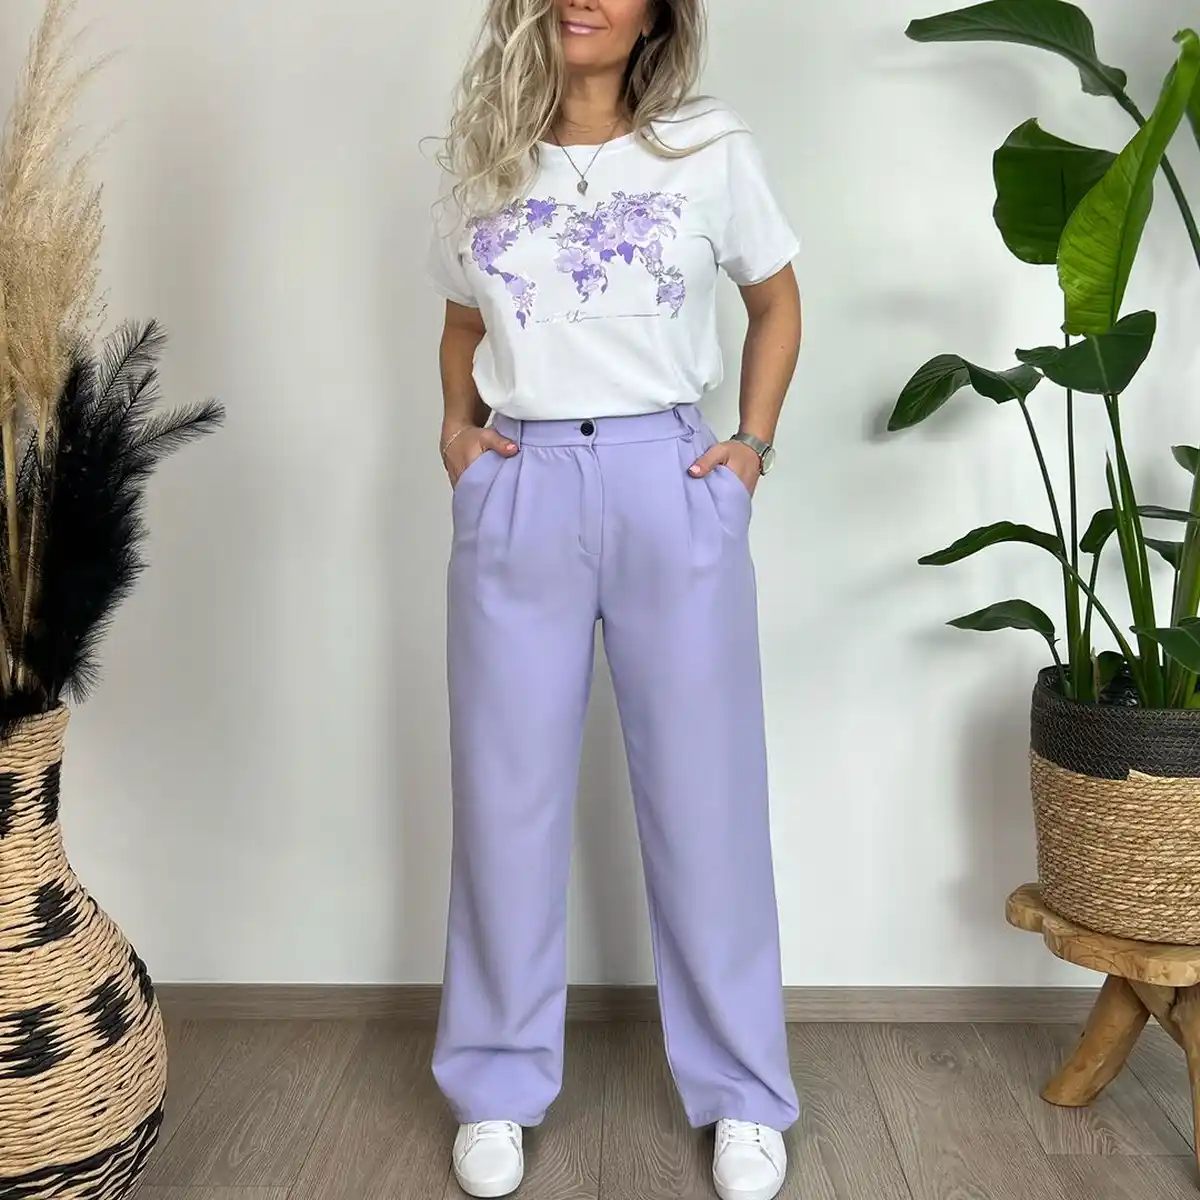 Top more than 81 top with purple pants latest - in.eteachers